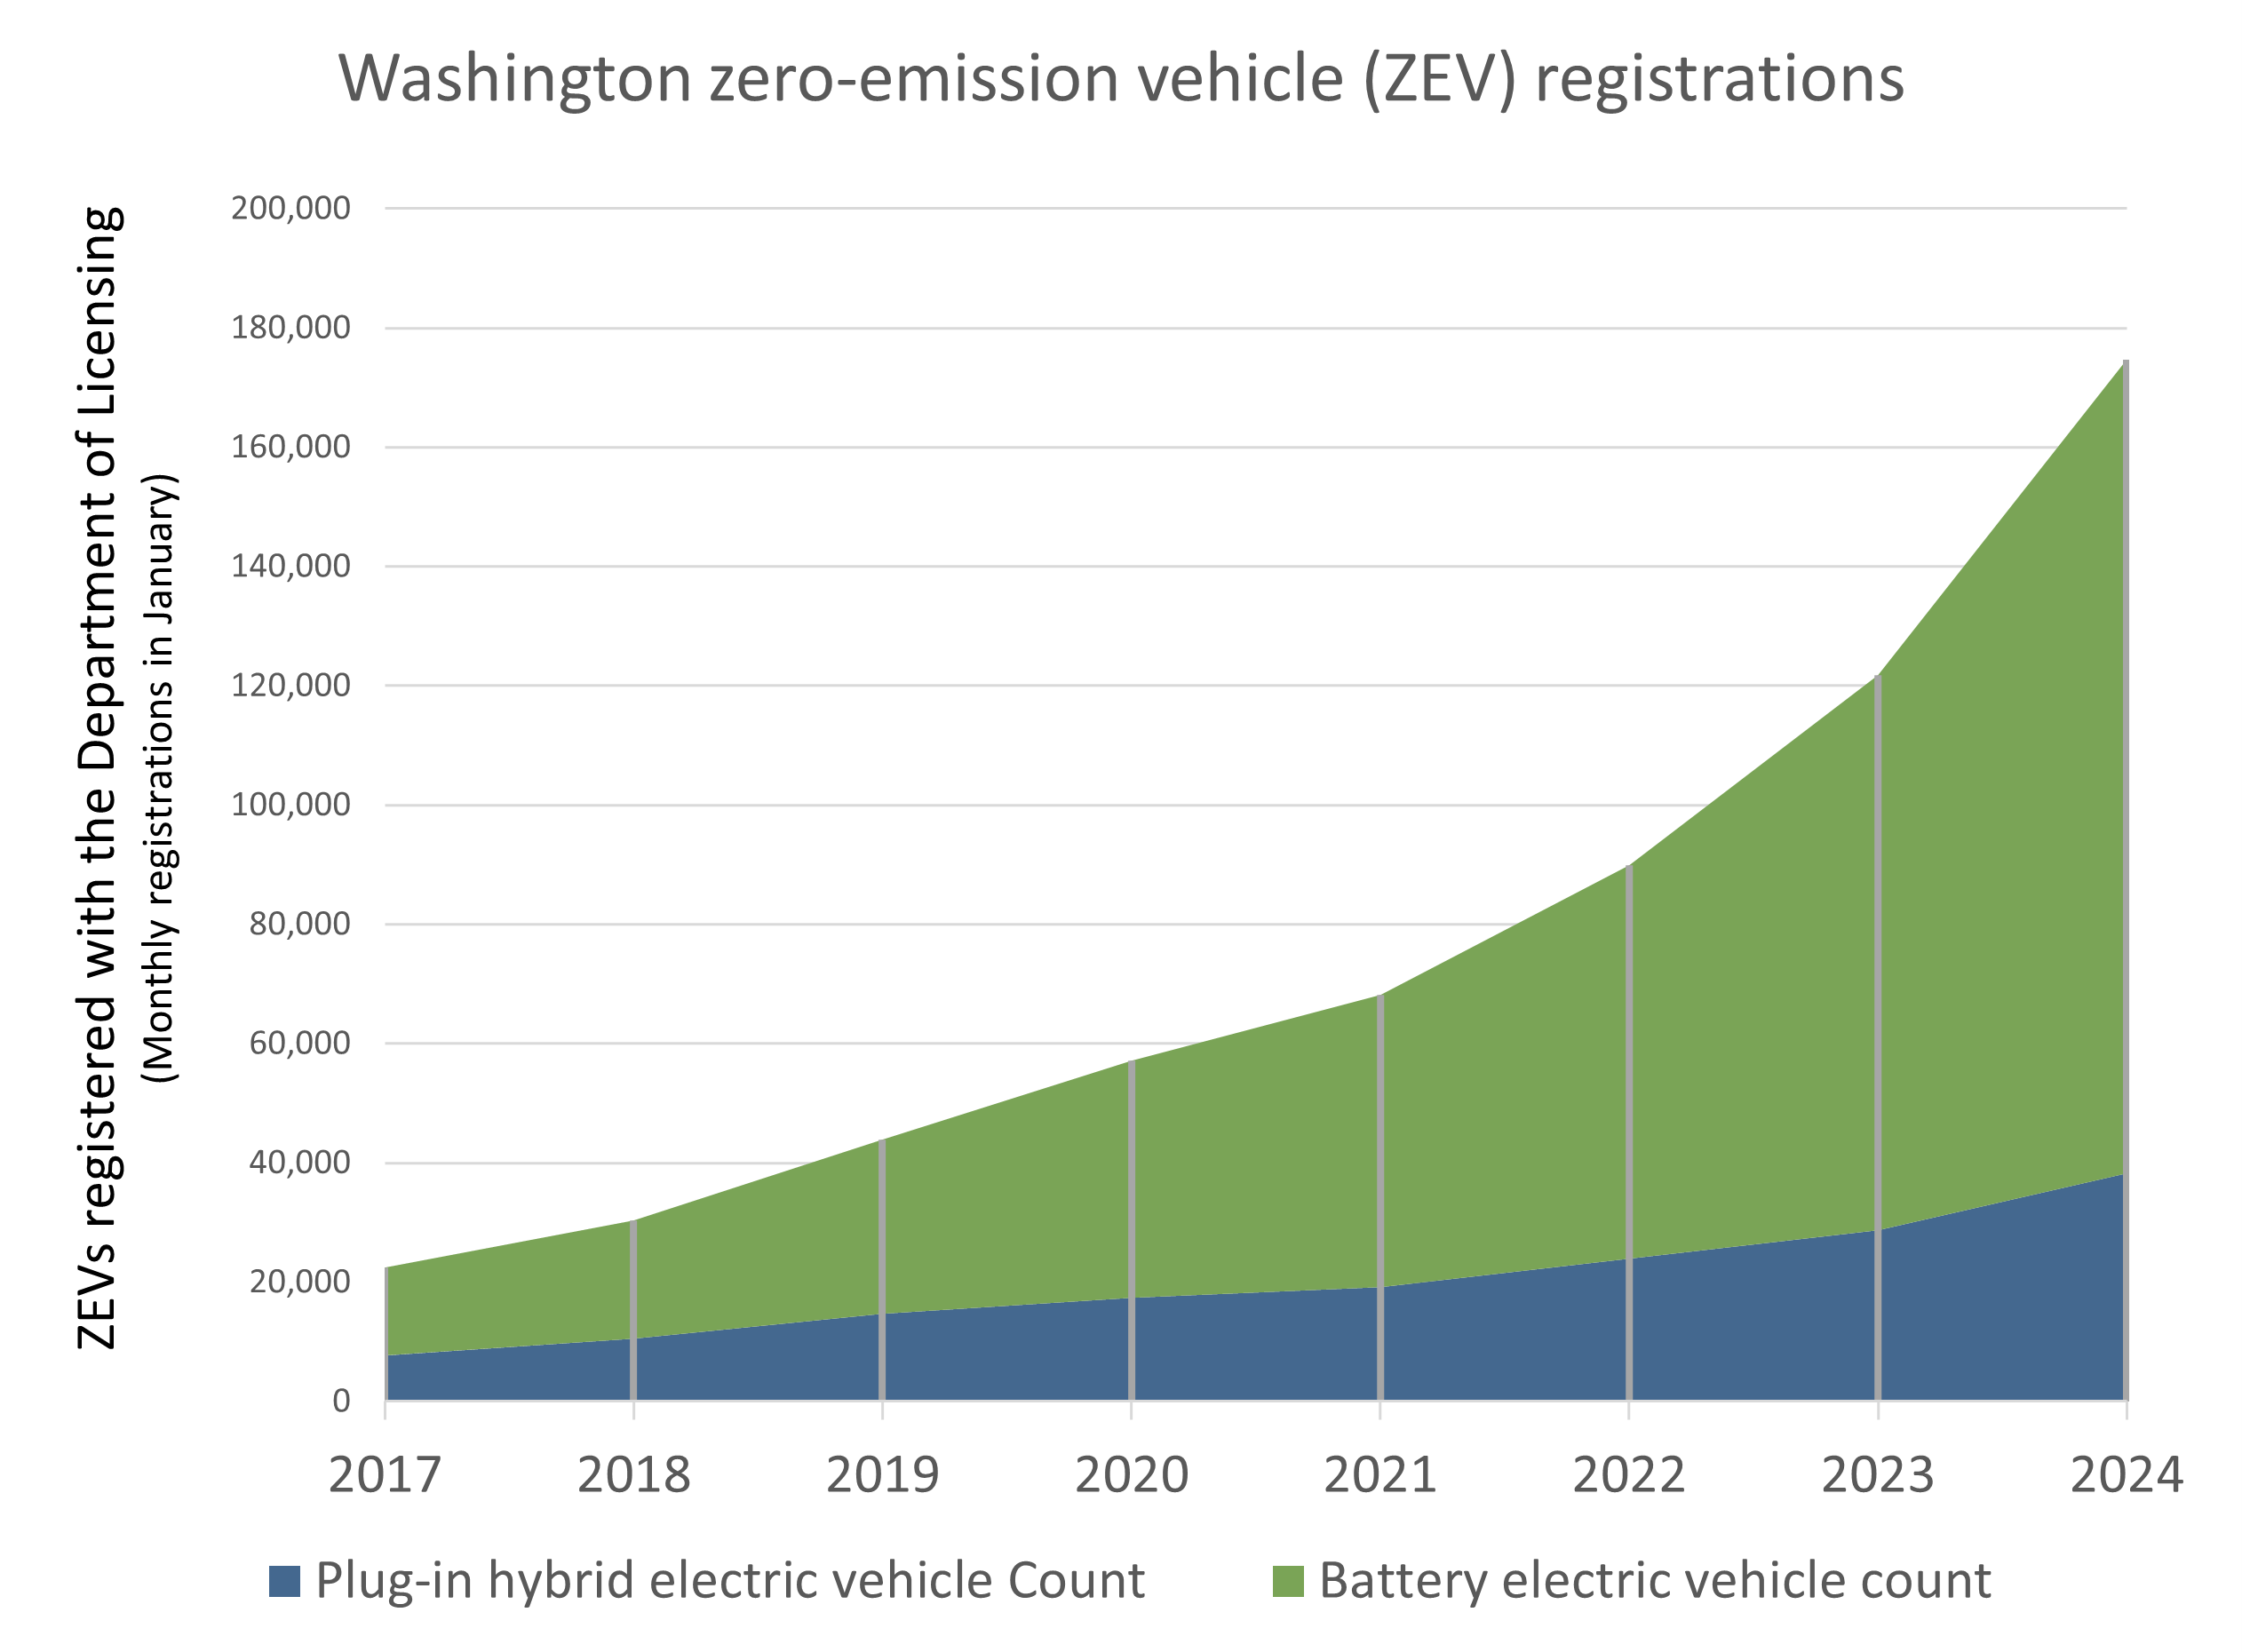 Graph showing Washington zero-emission vehicle registration numbers from 2017-2024